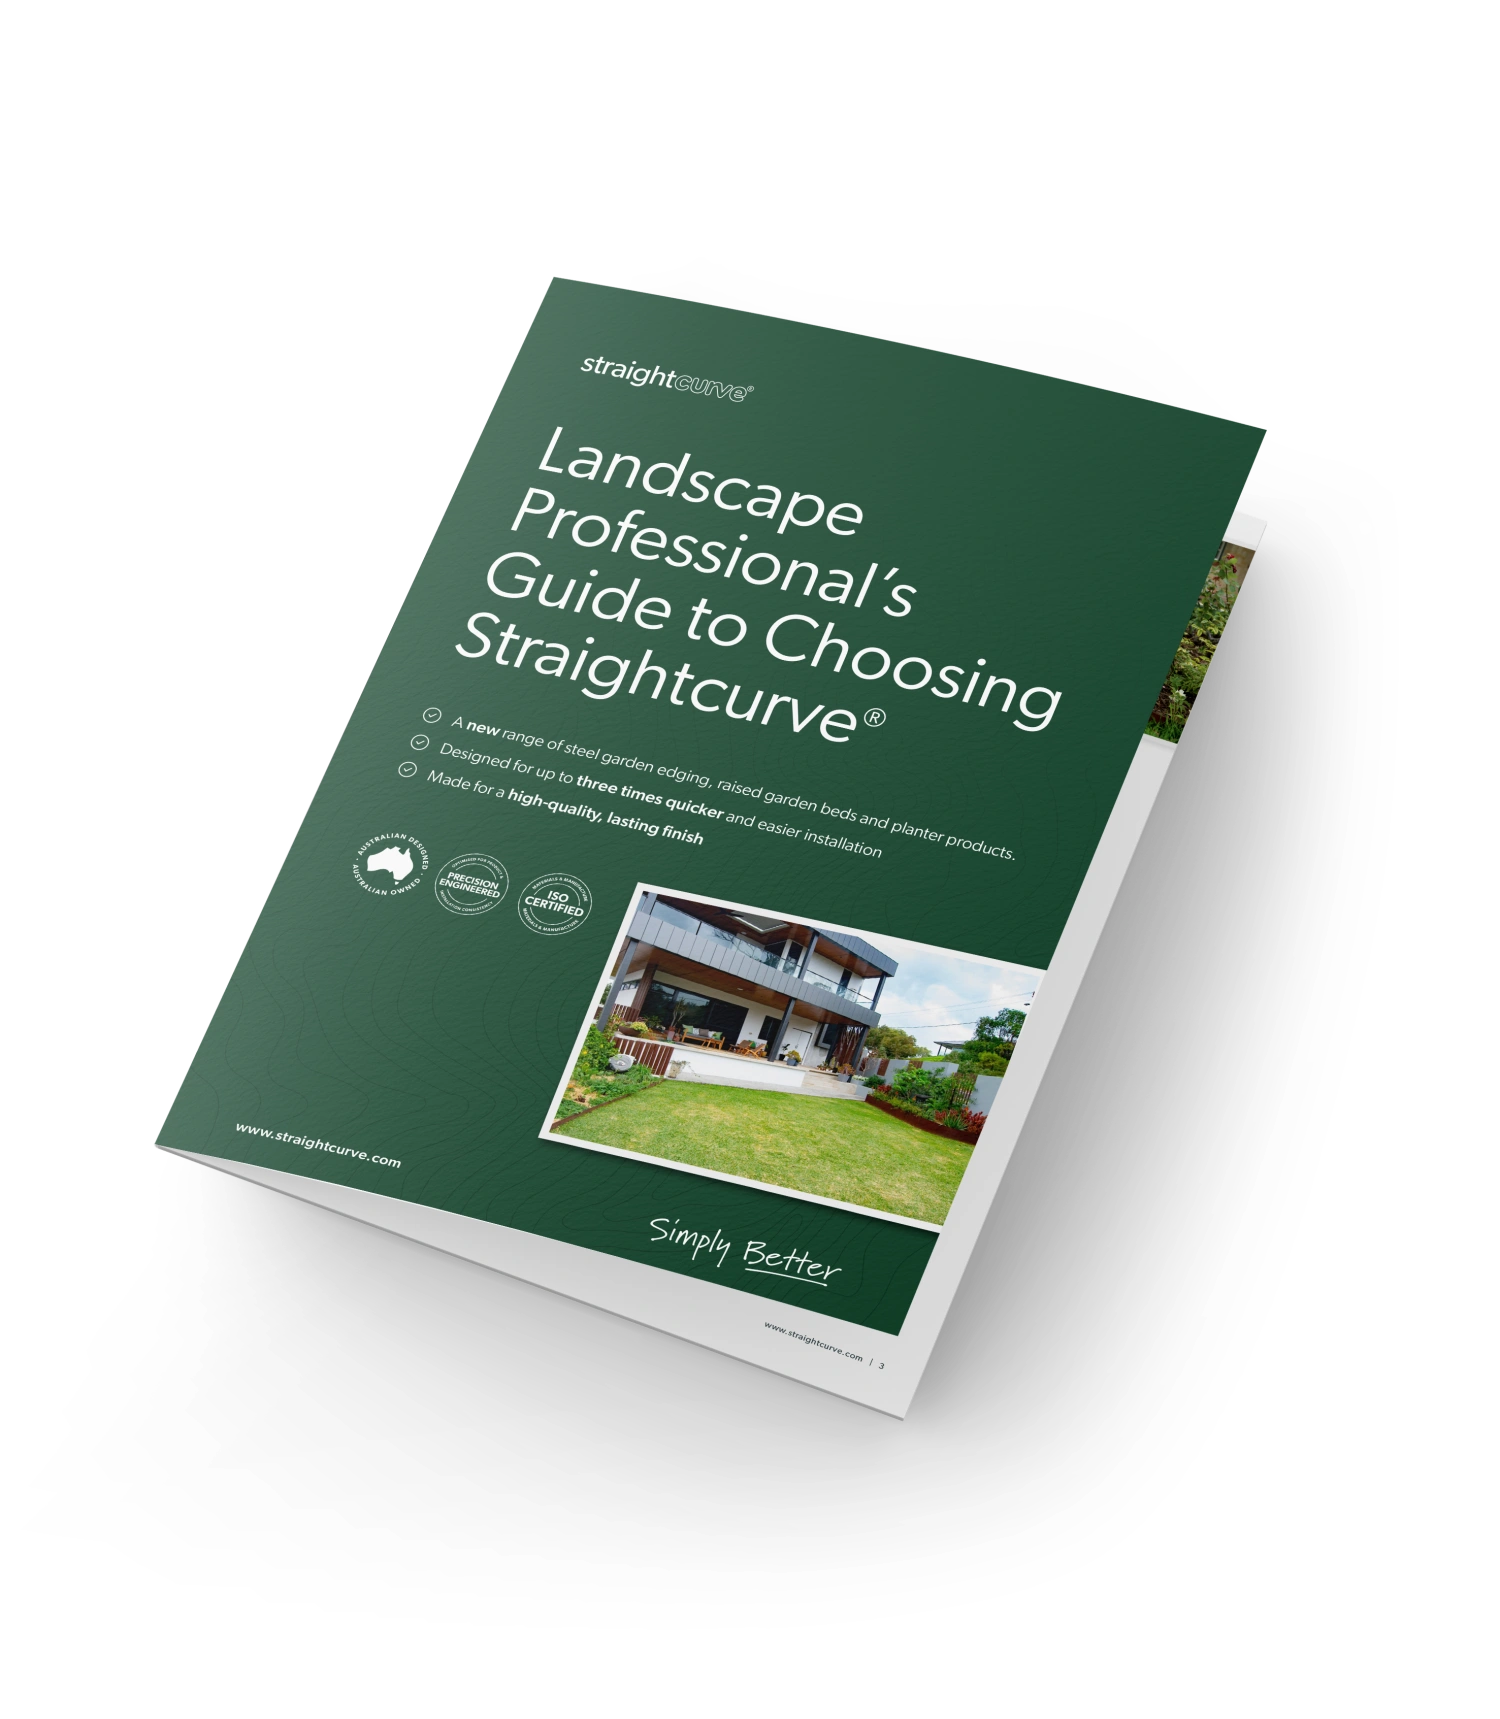 Thumbnail image of the Landscape Professionals Guide to Choosing Straightcurve - cover only